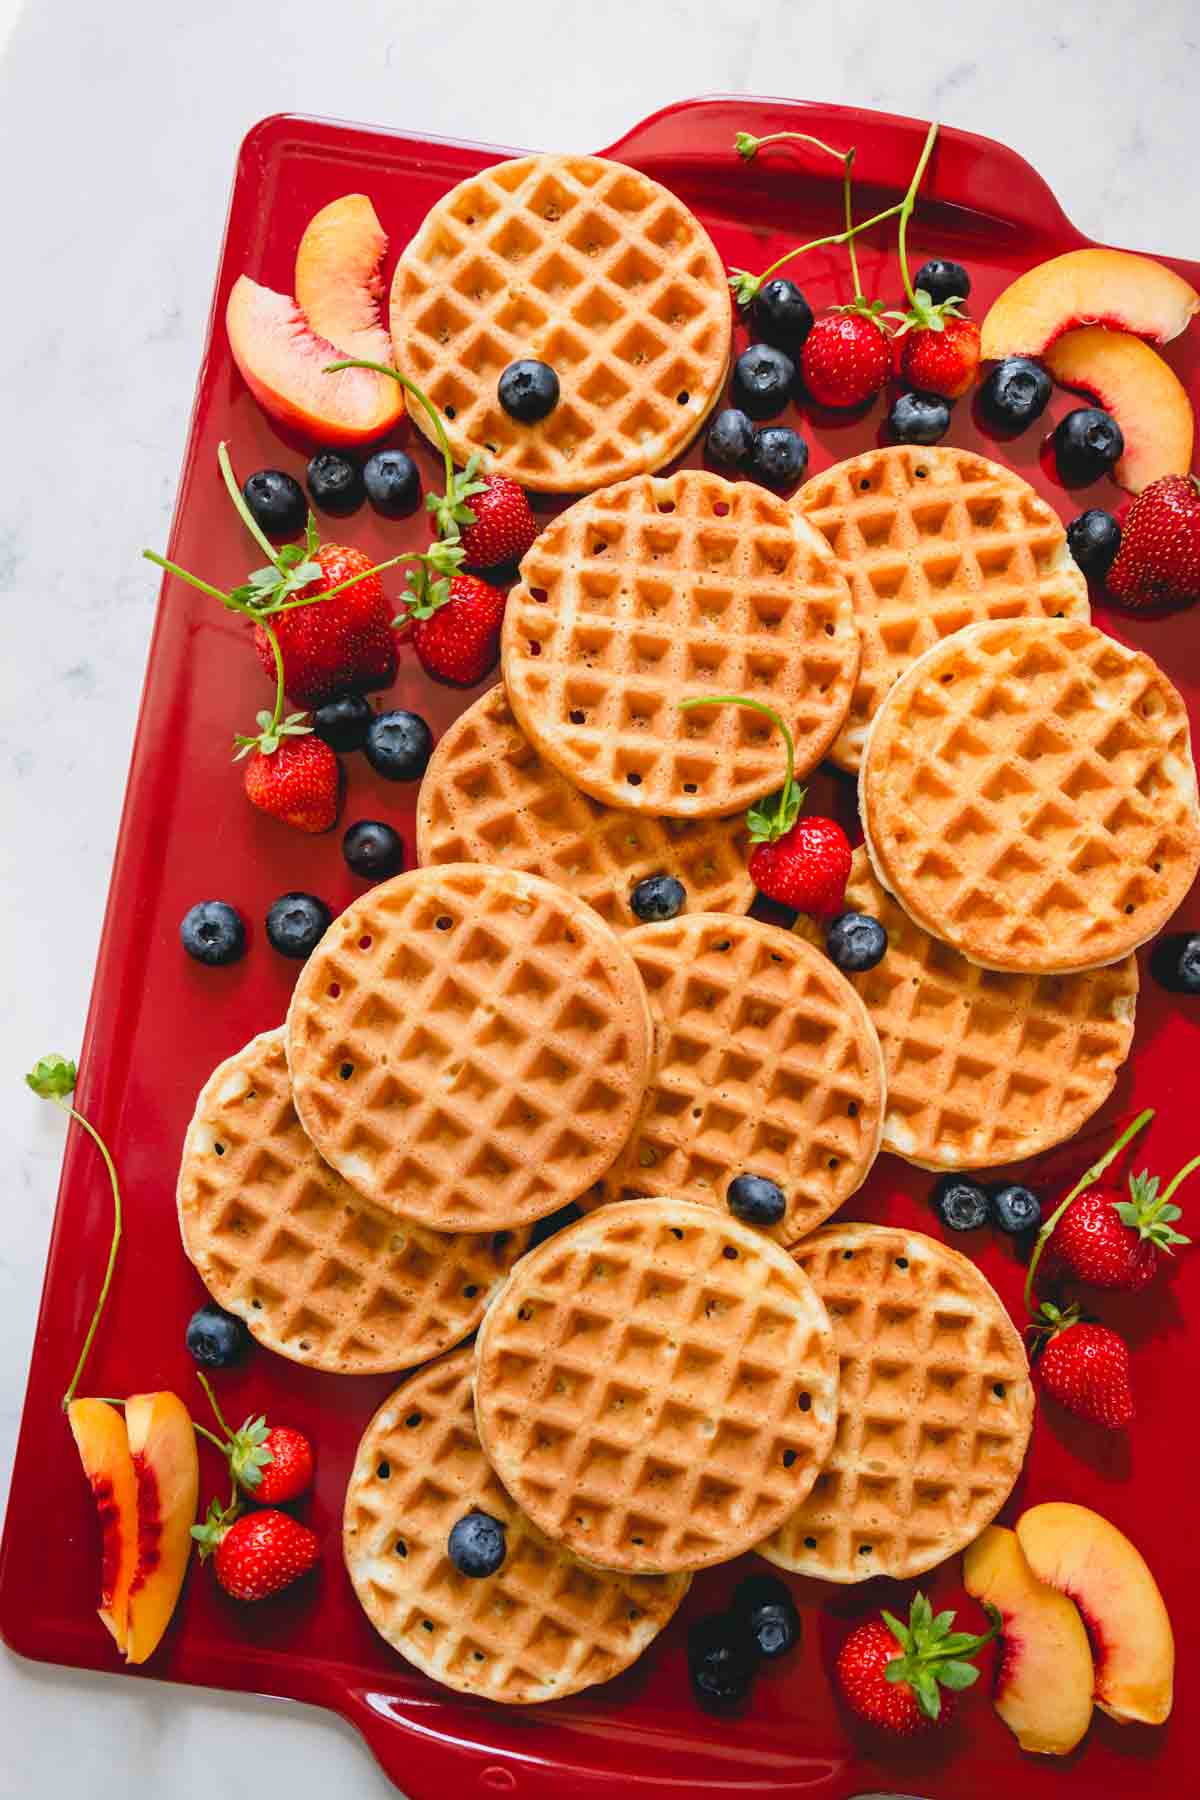 Waffles on a red serving board with fresh berries.